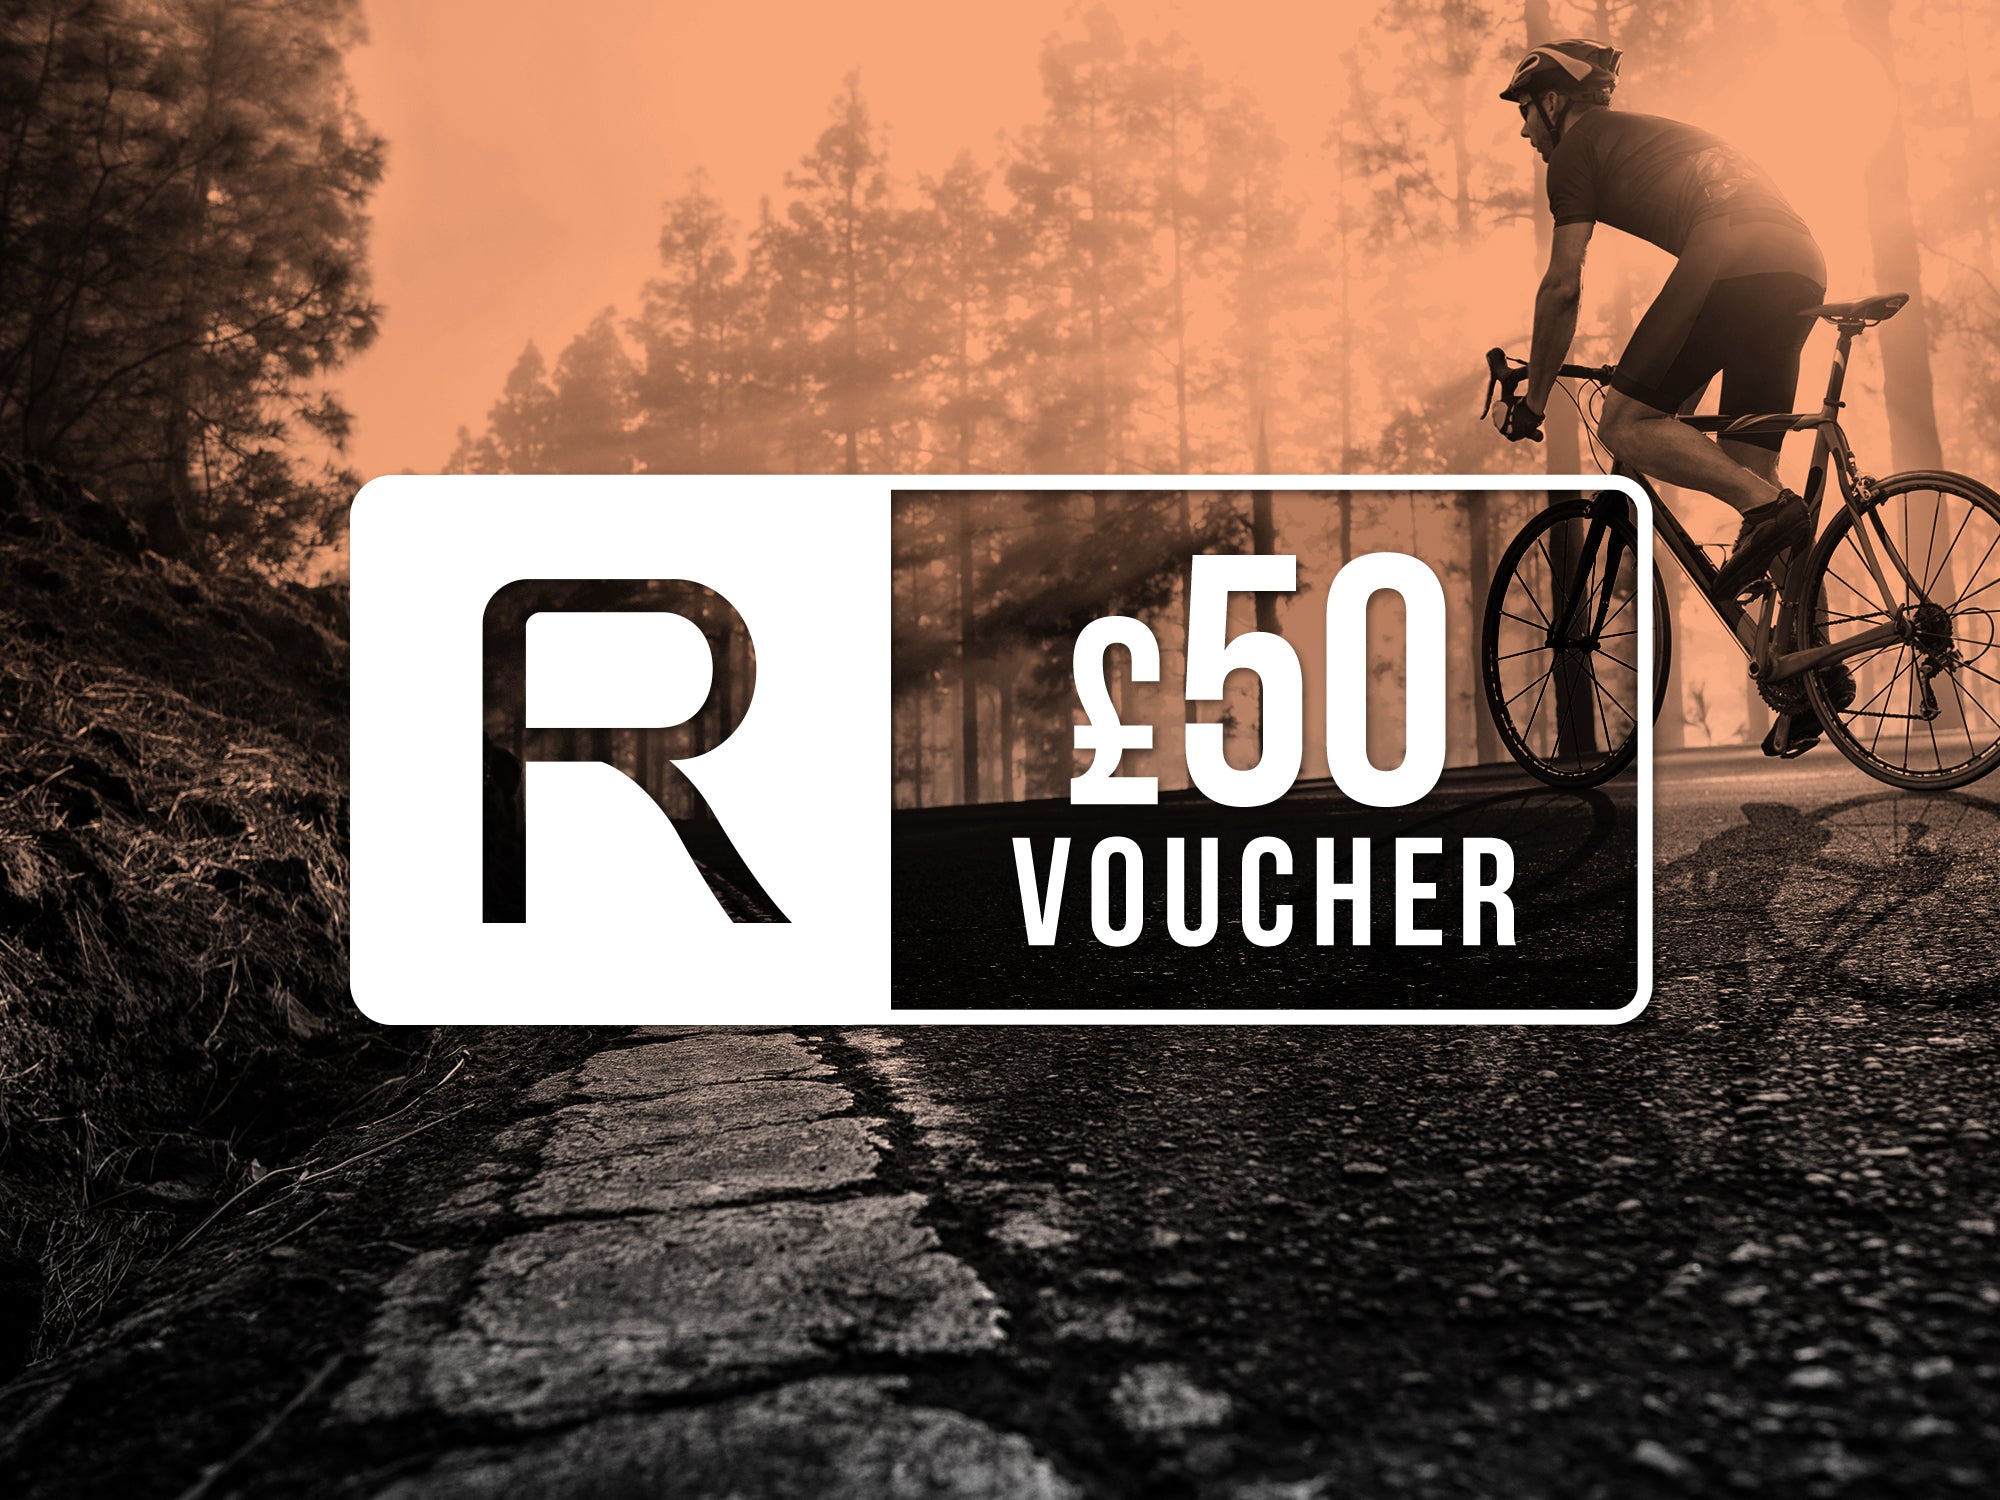 Reilly £50 Gift Voucher showing image of a cyclist in a forest with Reilly logo in the foreground with orange tint.